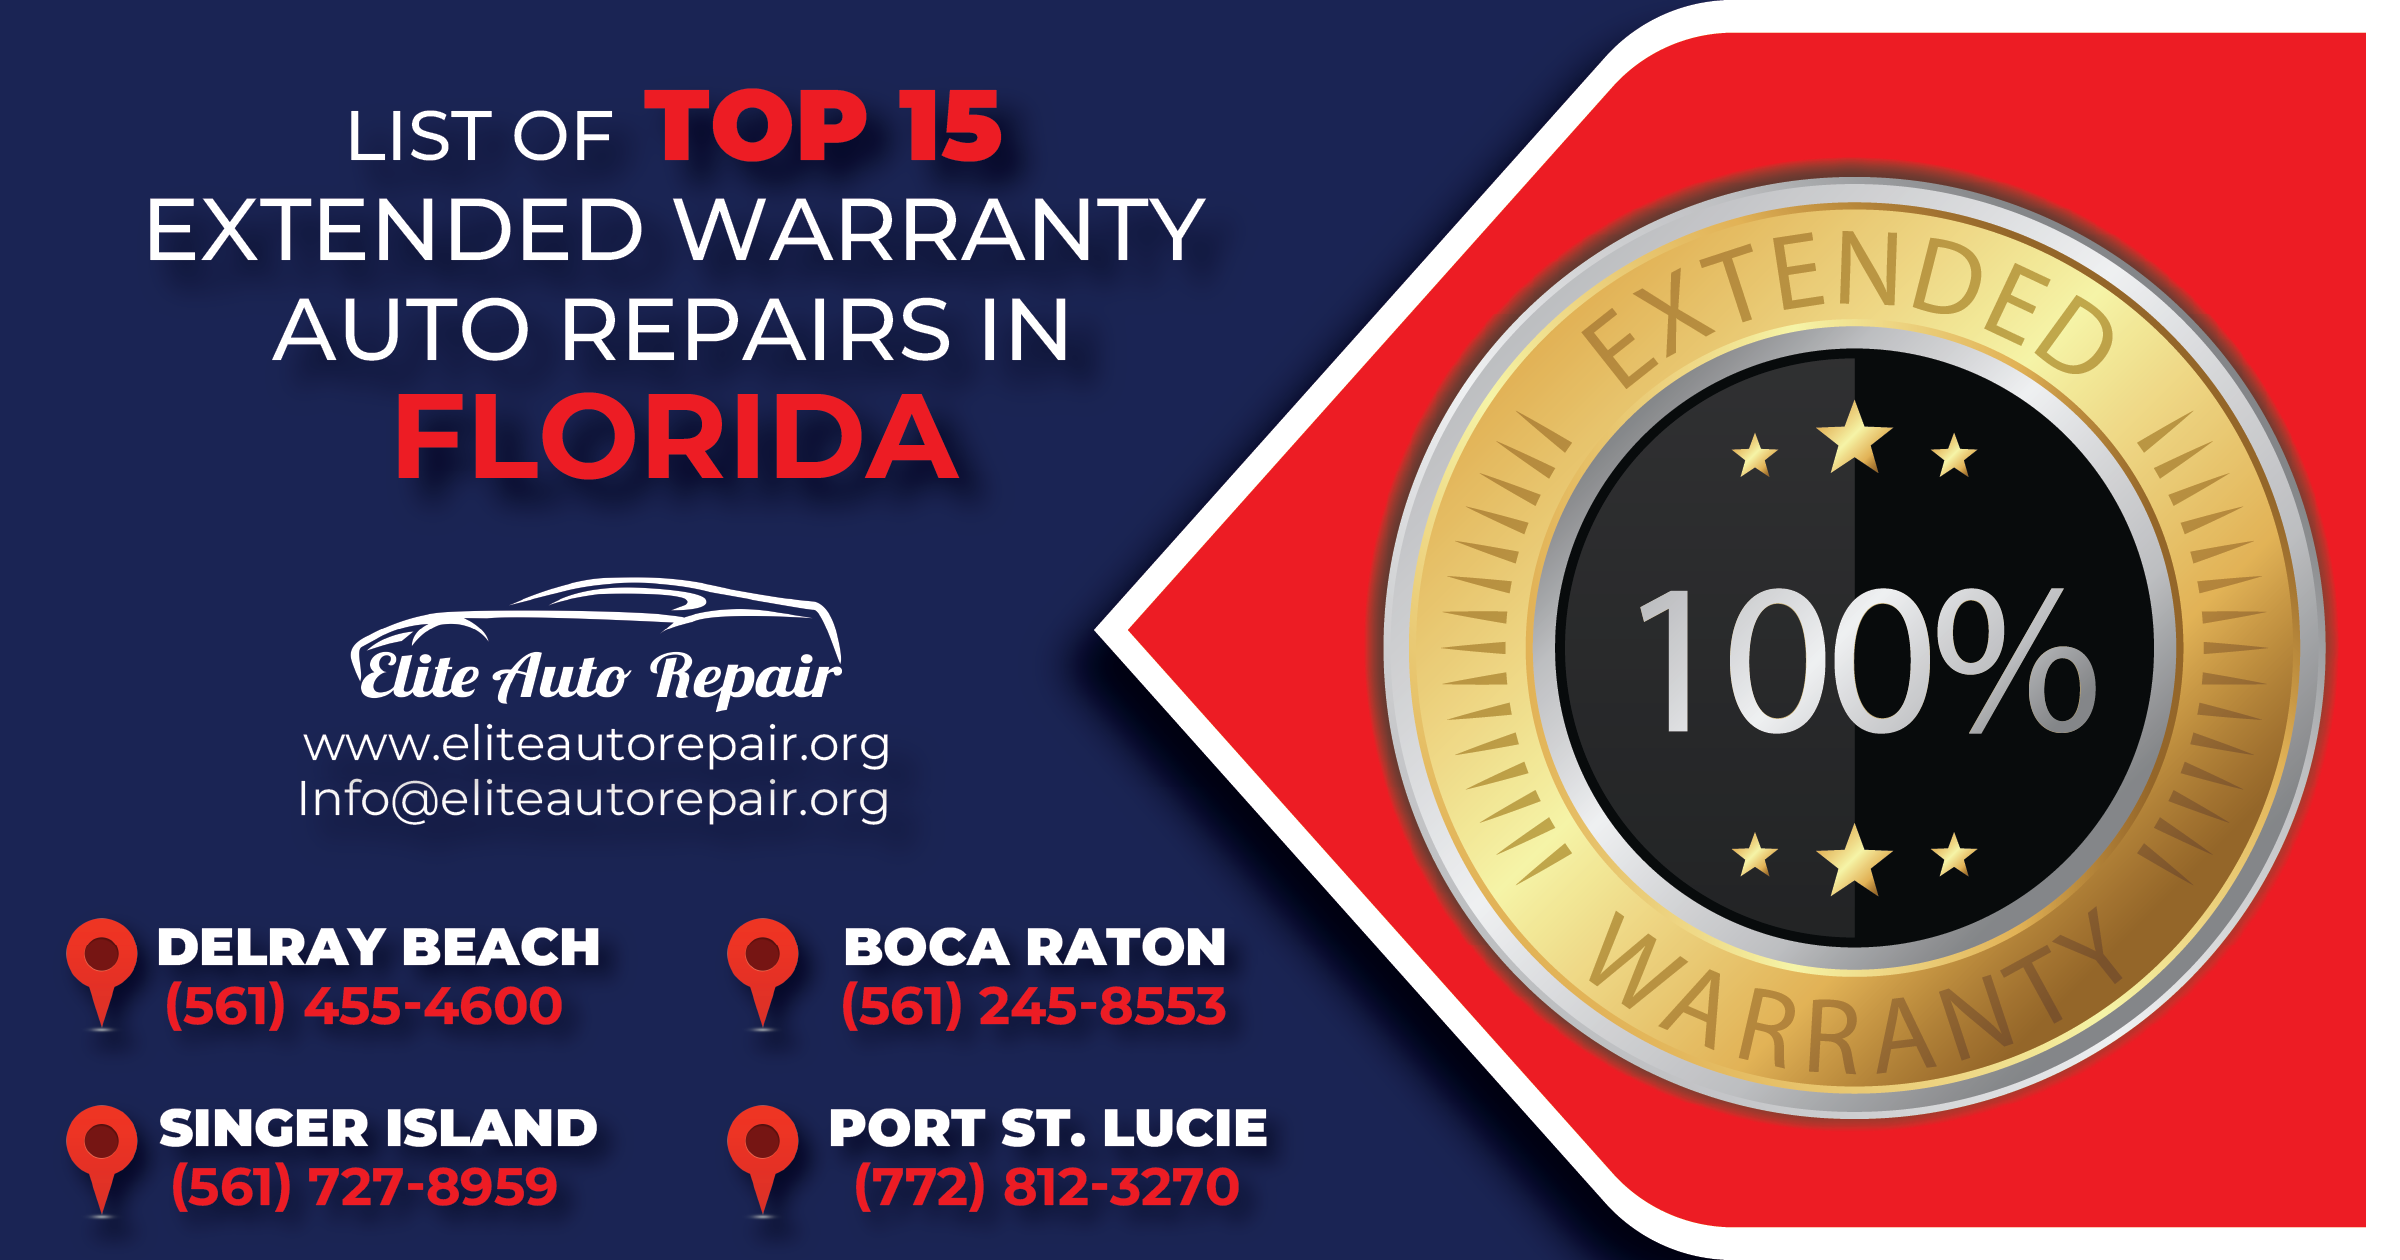 List of Top 15 Extended Warranty Auto Repairs in Florida